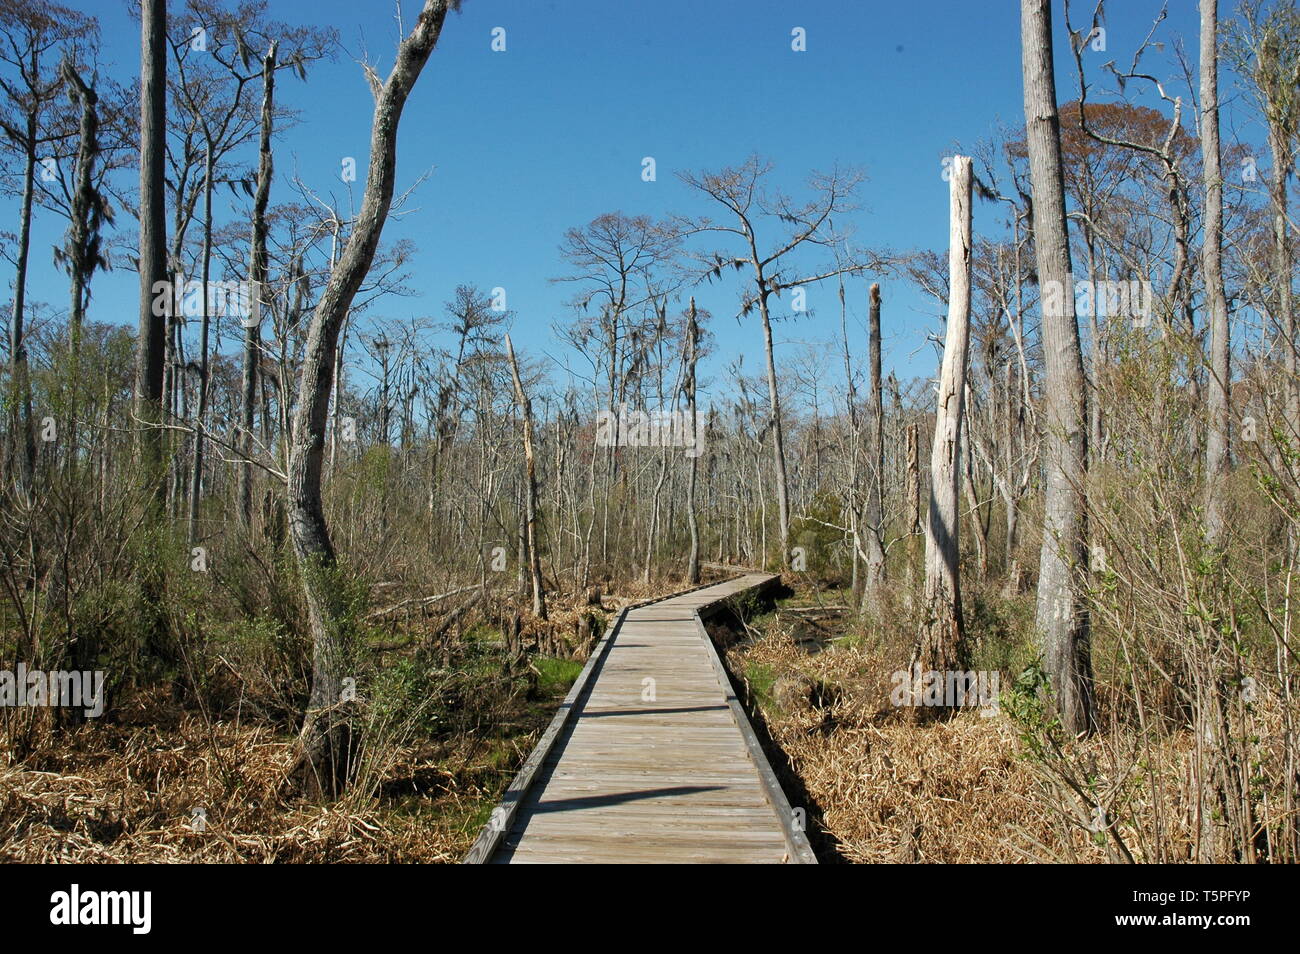 The View At Fairview Riverside State Park Madisonville Louisiana Usa Stock Photo Alamy